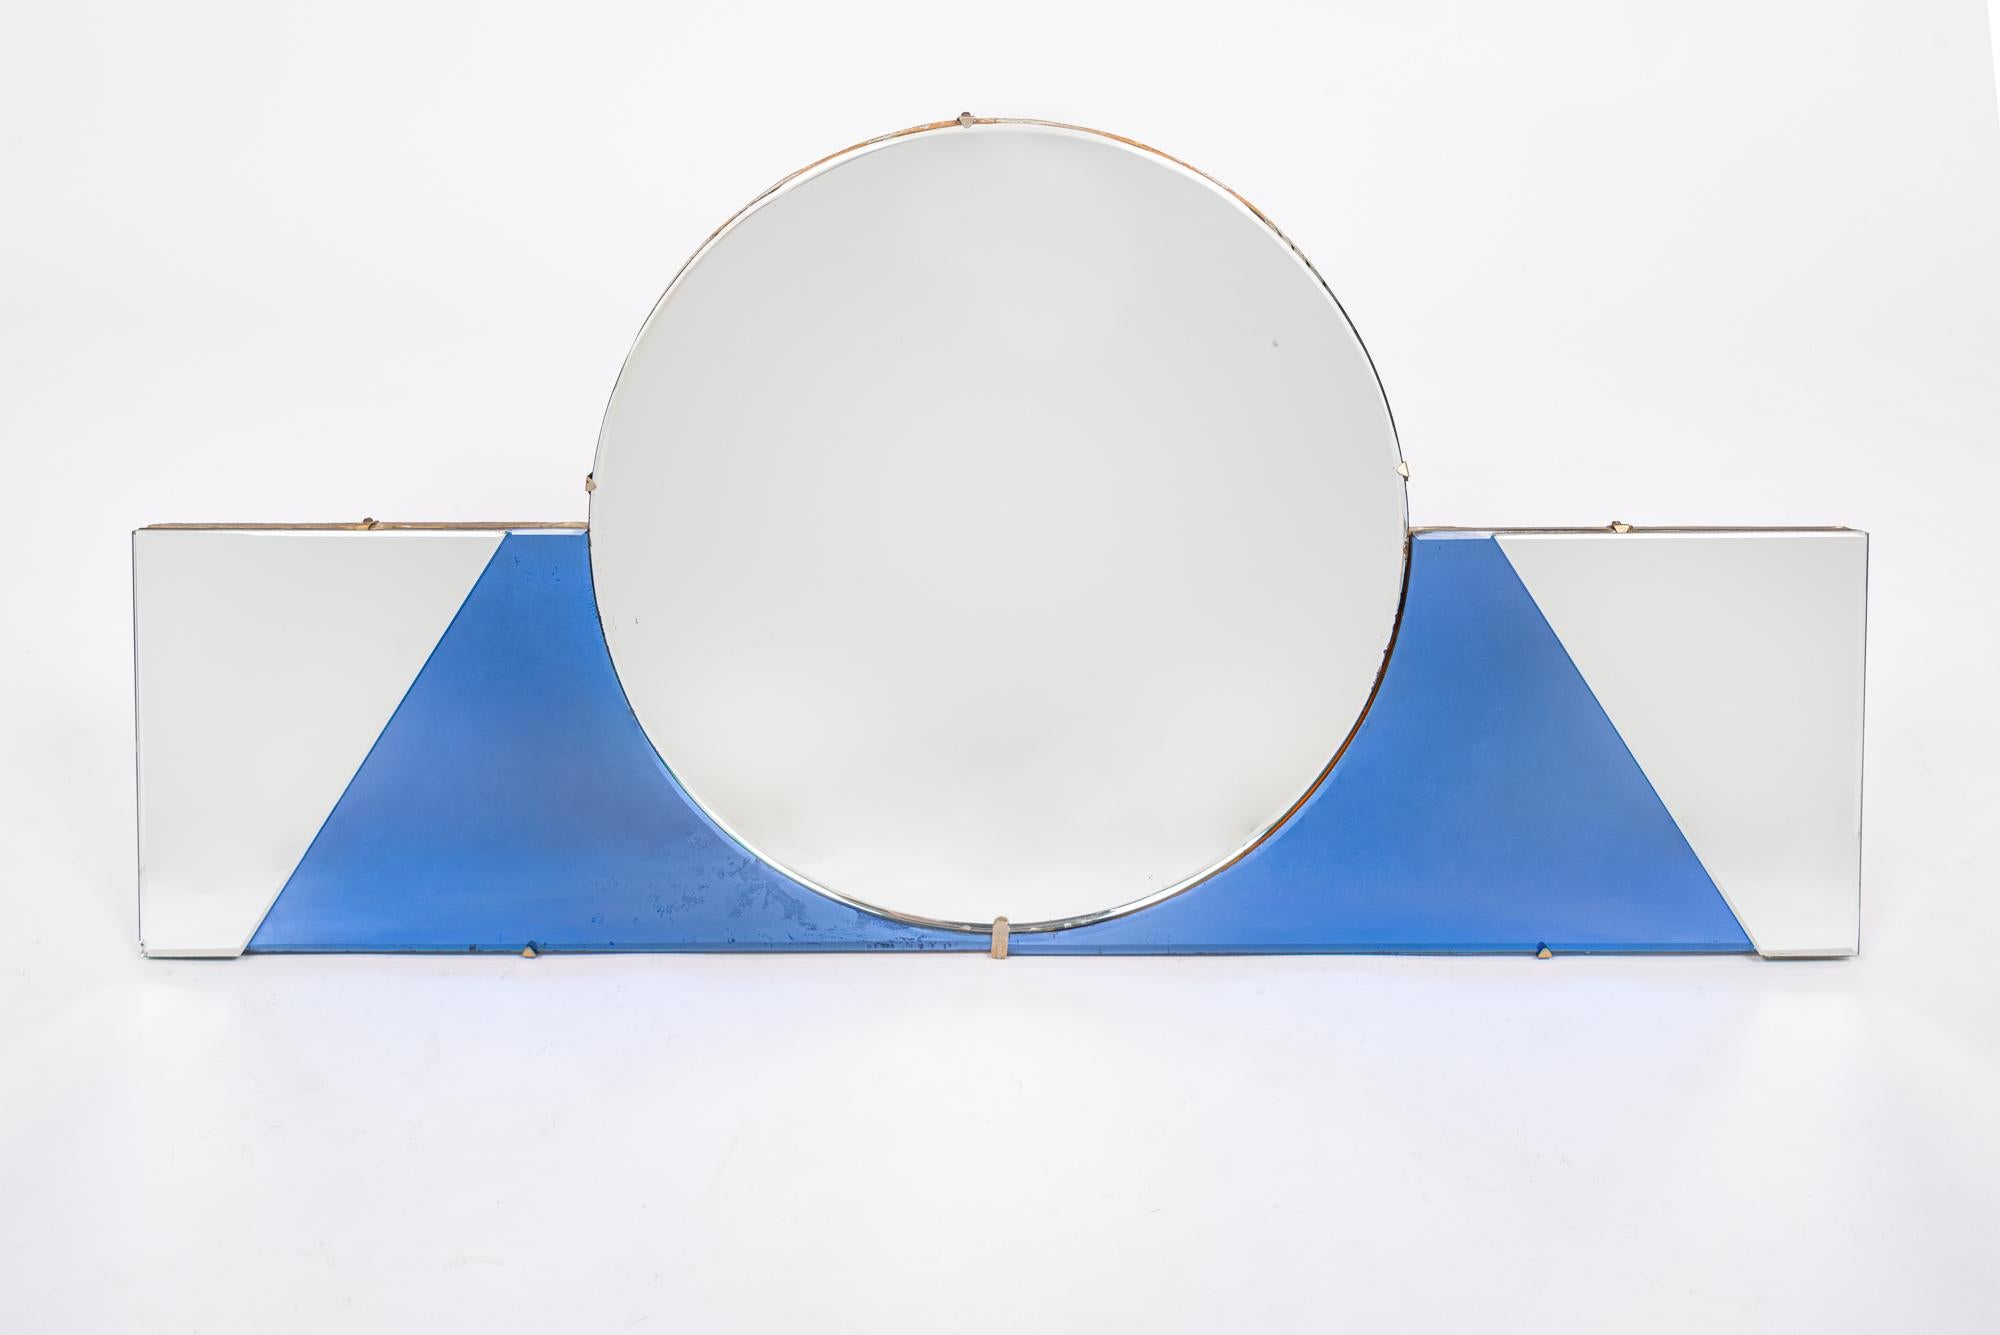 This beautiful antique Art Deco hanging beveled wall mirror is circa 1930. The mirror has an elegant, geometric design featuring a center round mirror over a rectangular lower band with a colored blue glass field. Hanging wire on wooden backside